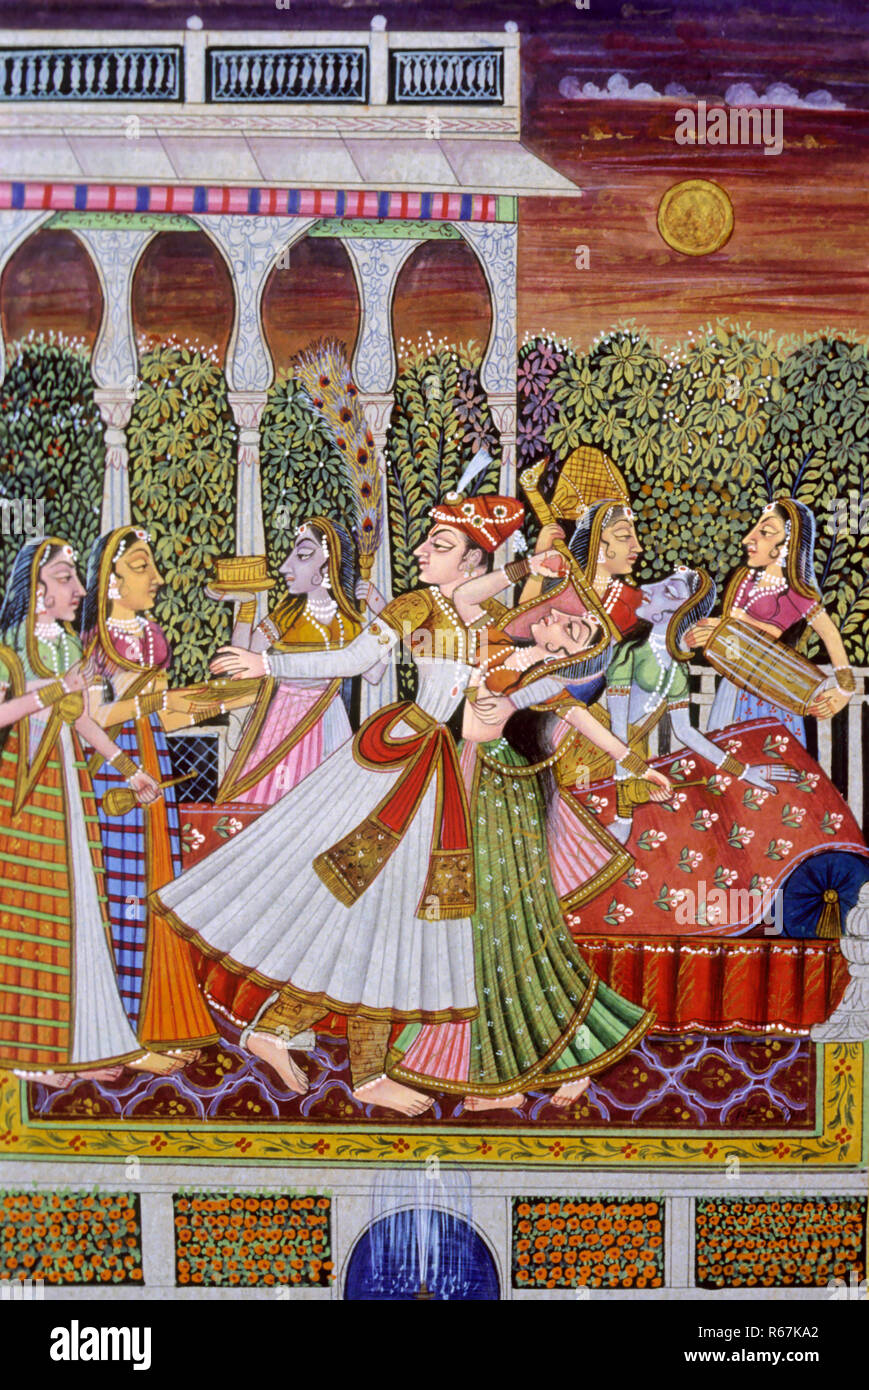 Mughal painting of King Raja Maharaja Emperor with Queens in the garden Stock Photo